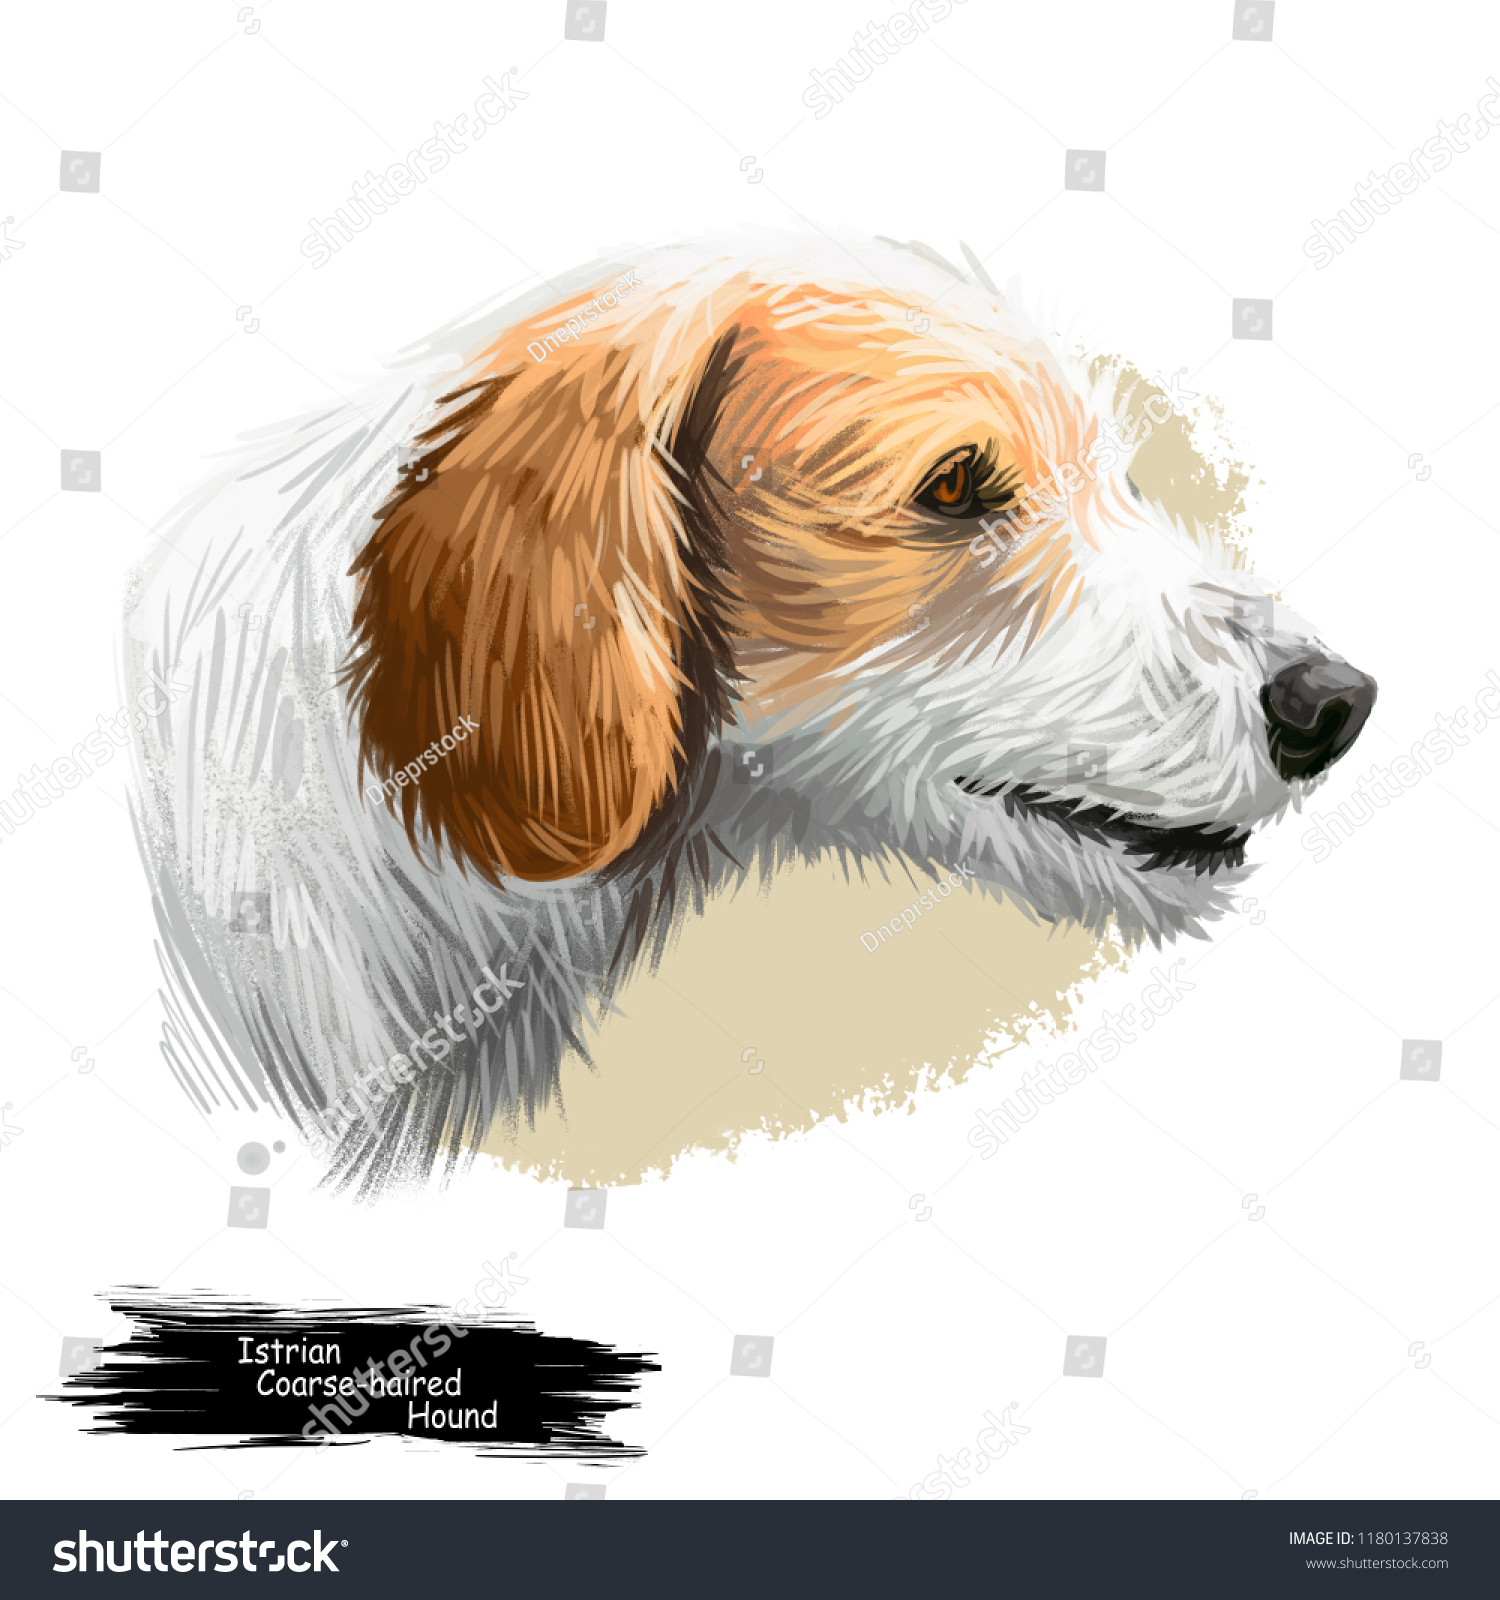 Istrian Coarsehaired Hound Istrian Roughcoated Hound Stock Illustration 1180137838